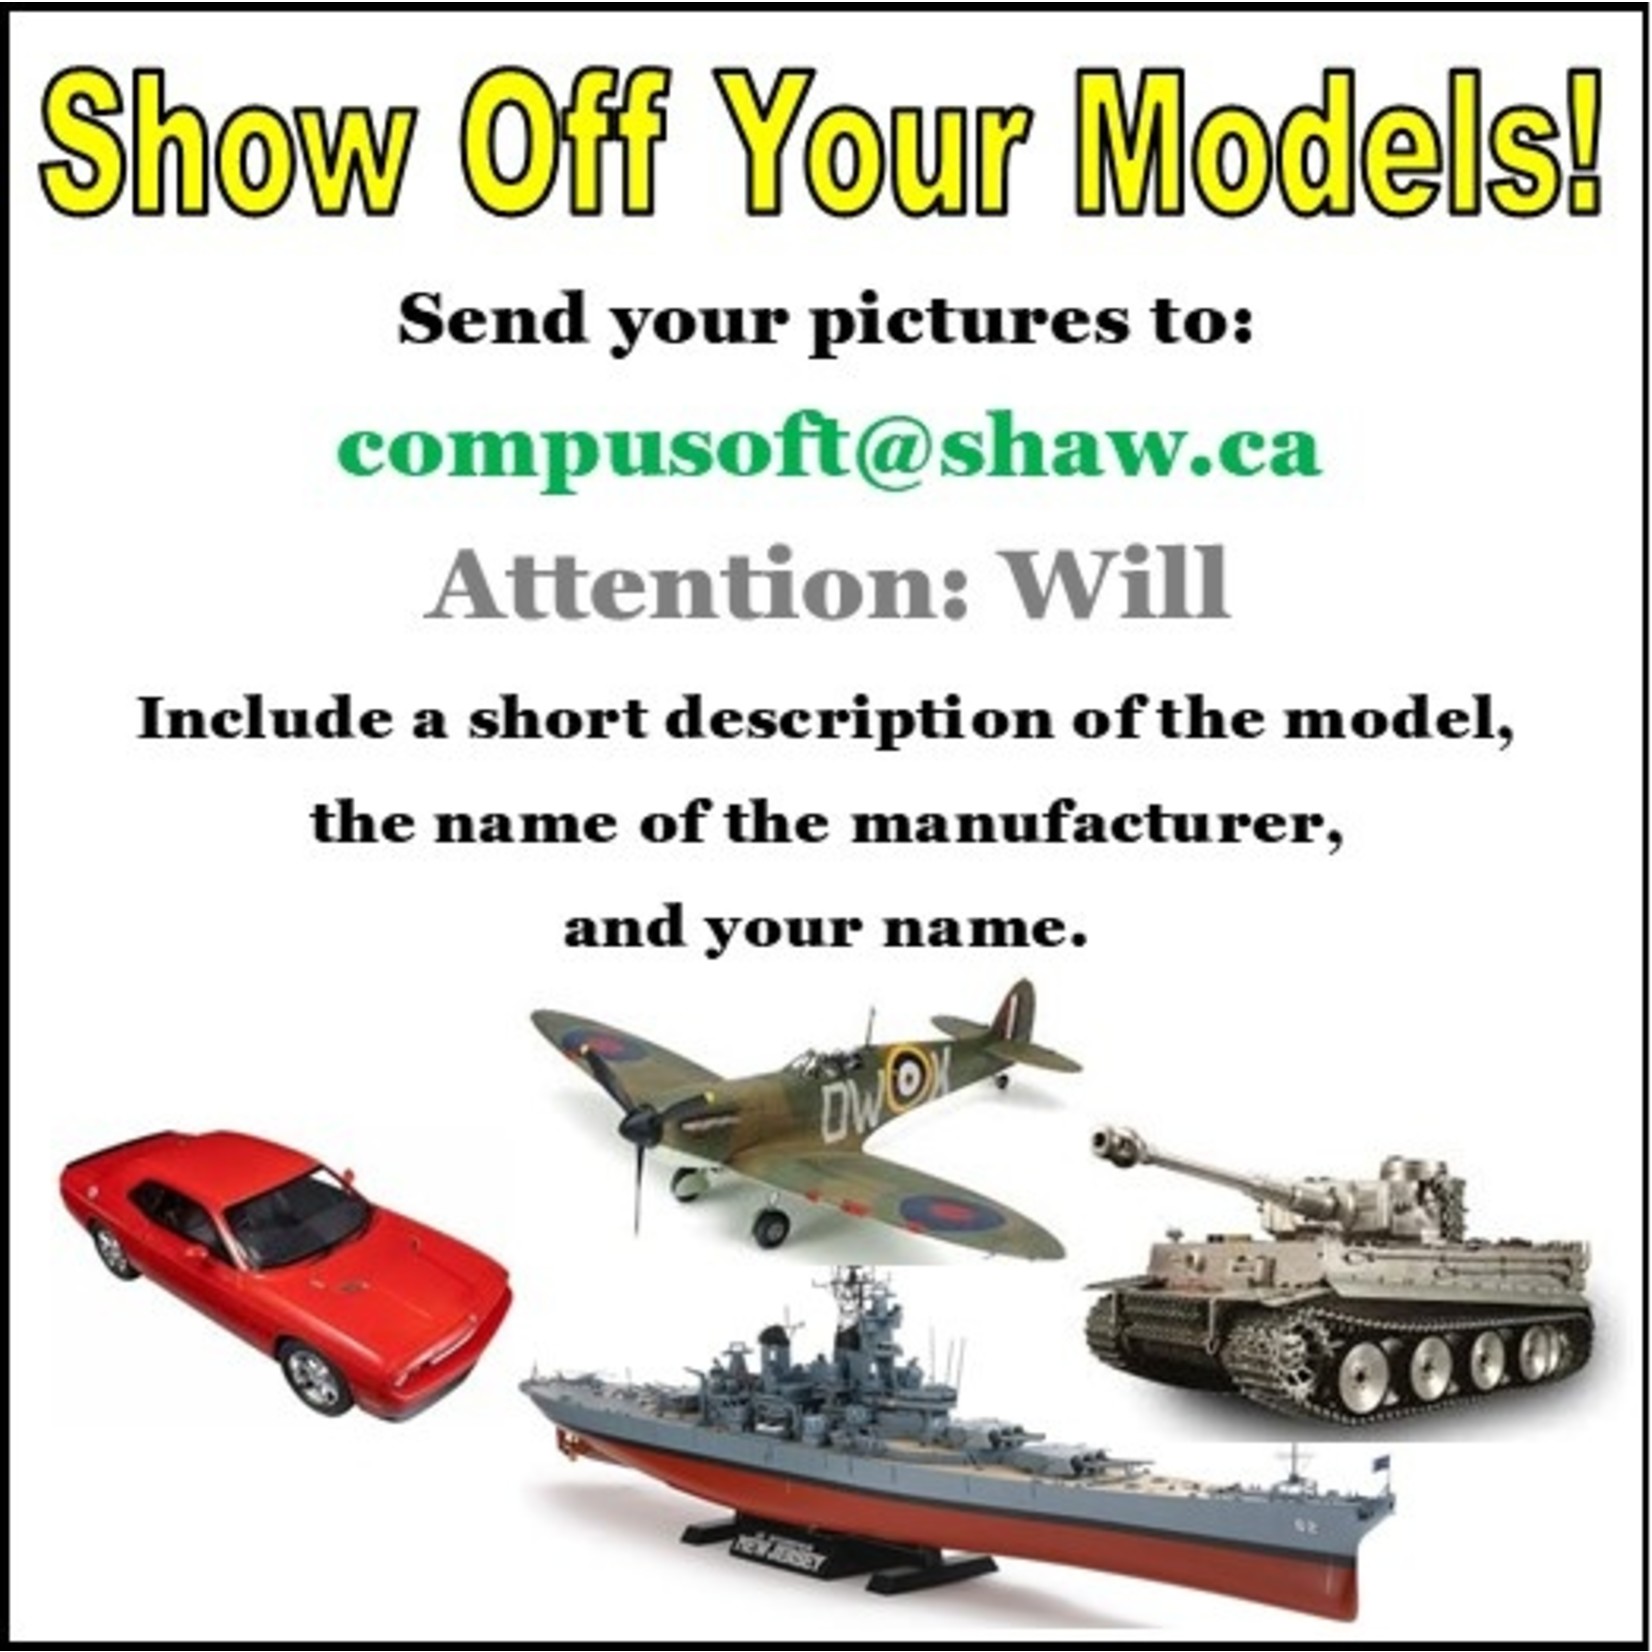 Show off your models